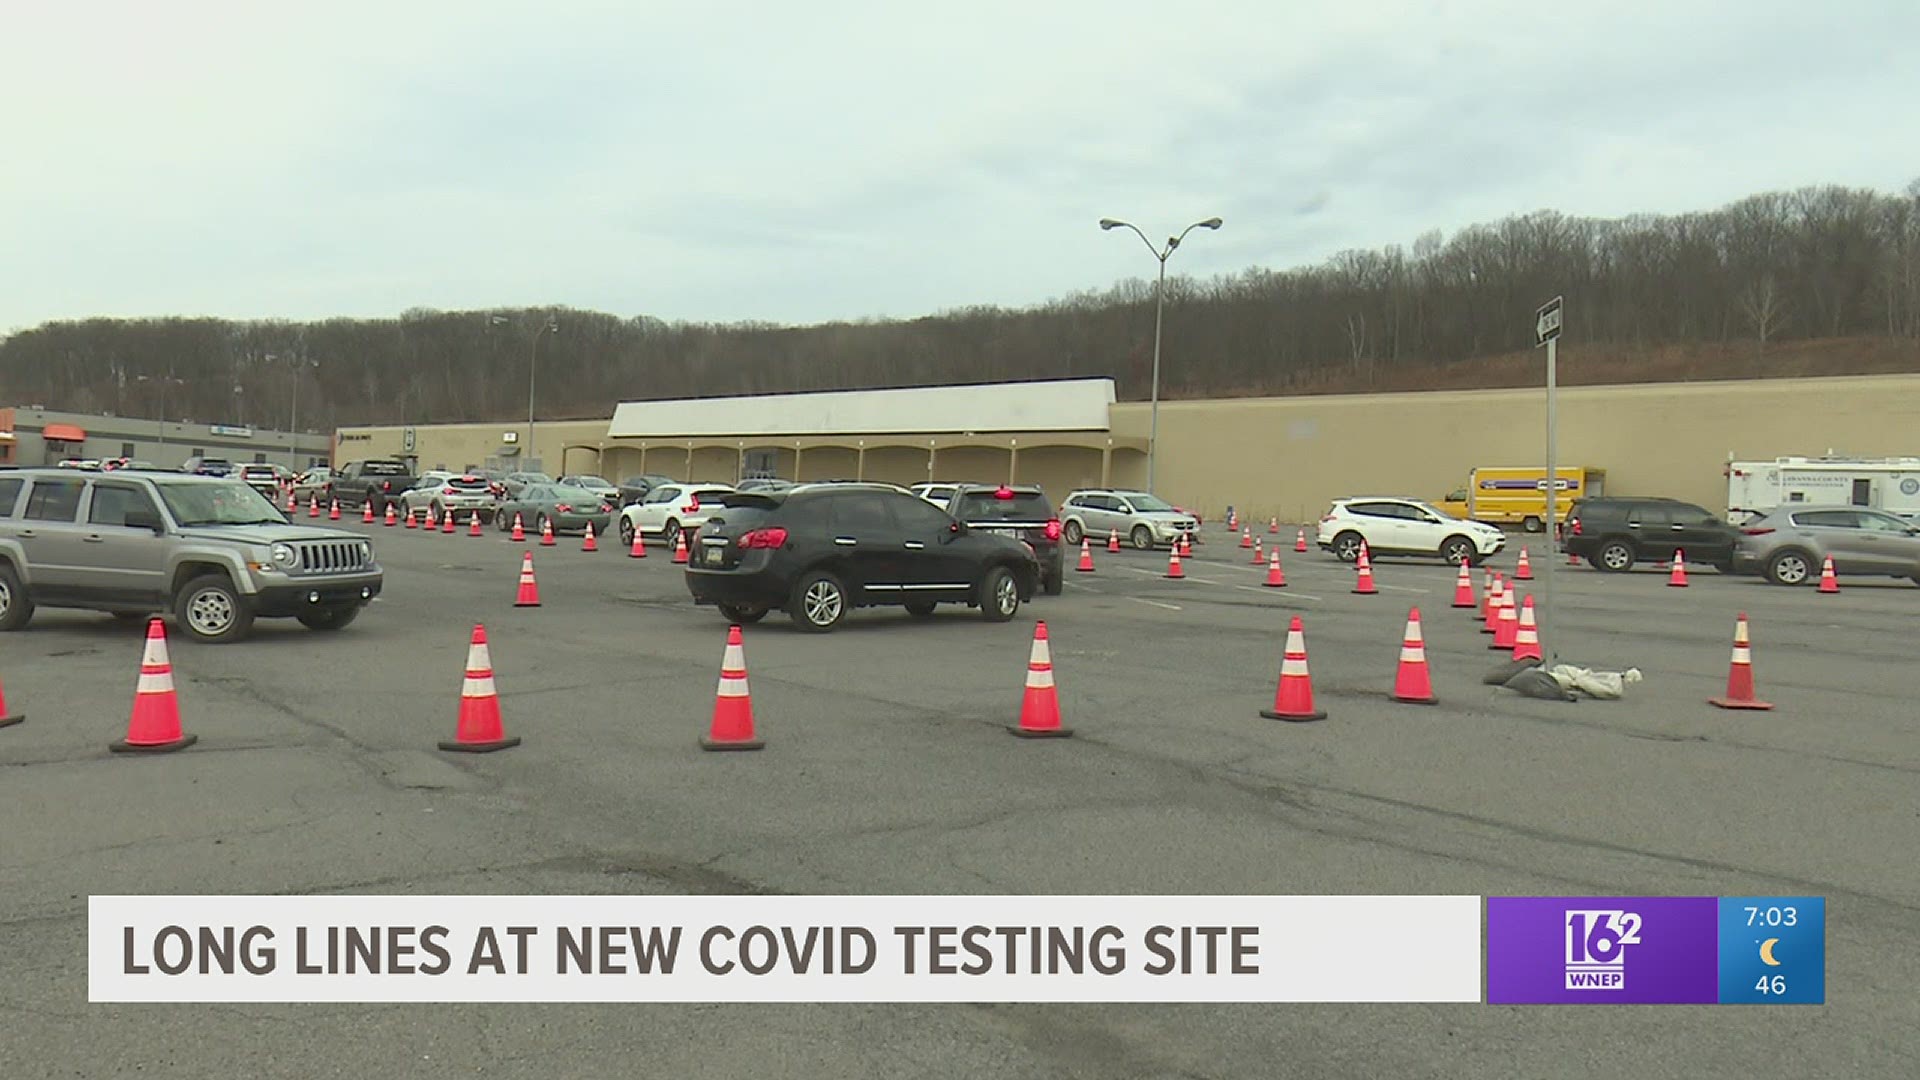 Covid testing is available from 7:00 a.m. to 6:00 p.m. till November 24. 440 people can be tested per day.